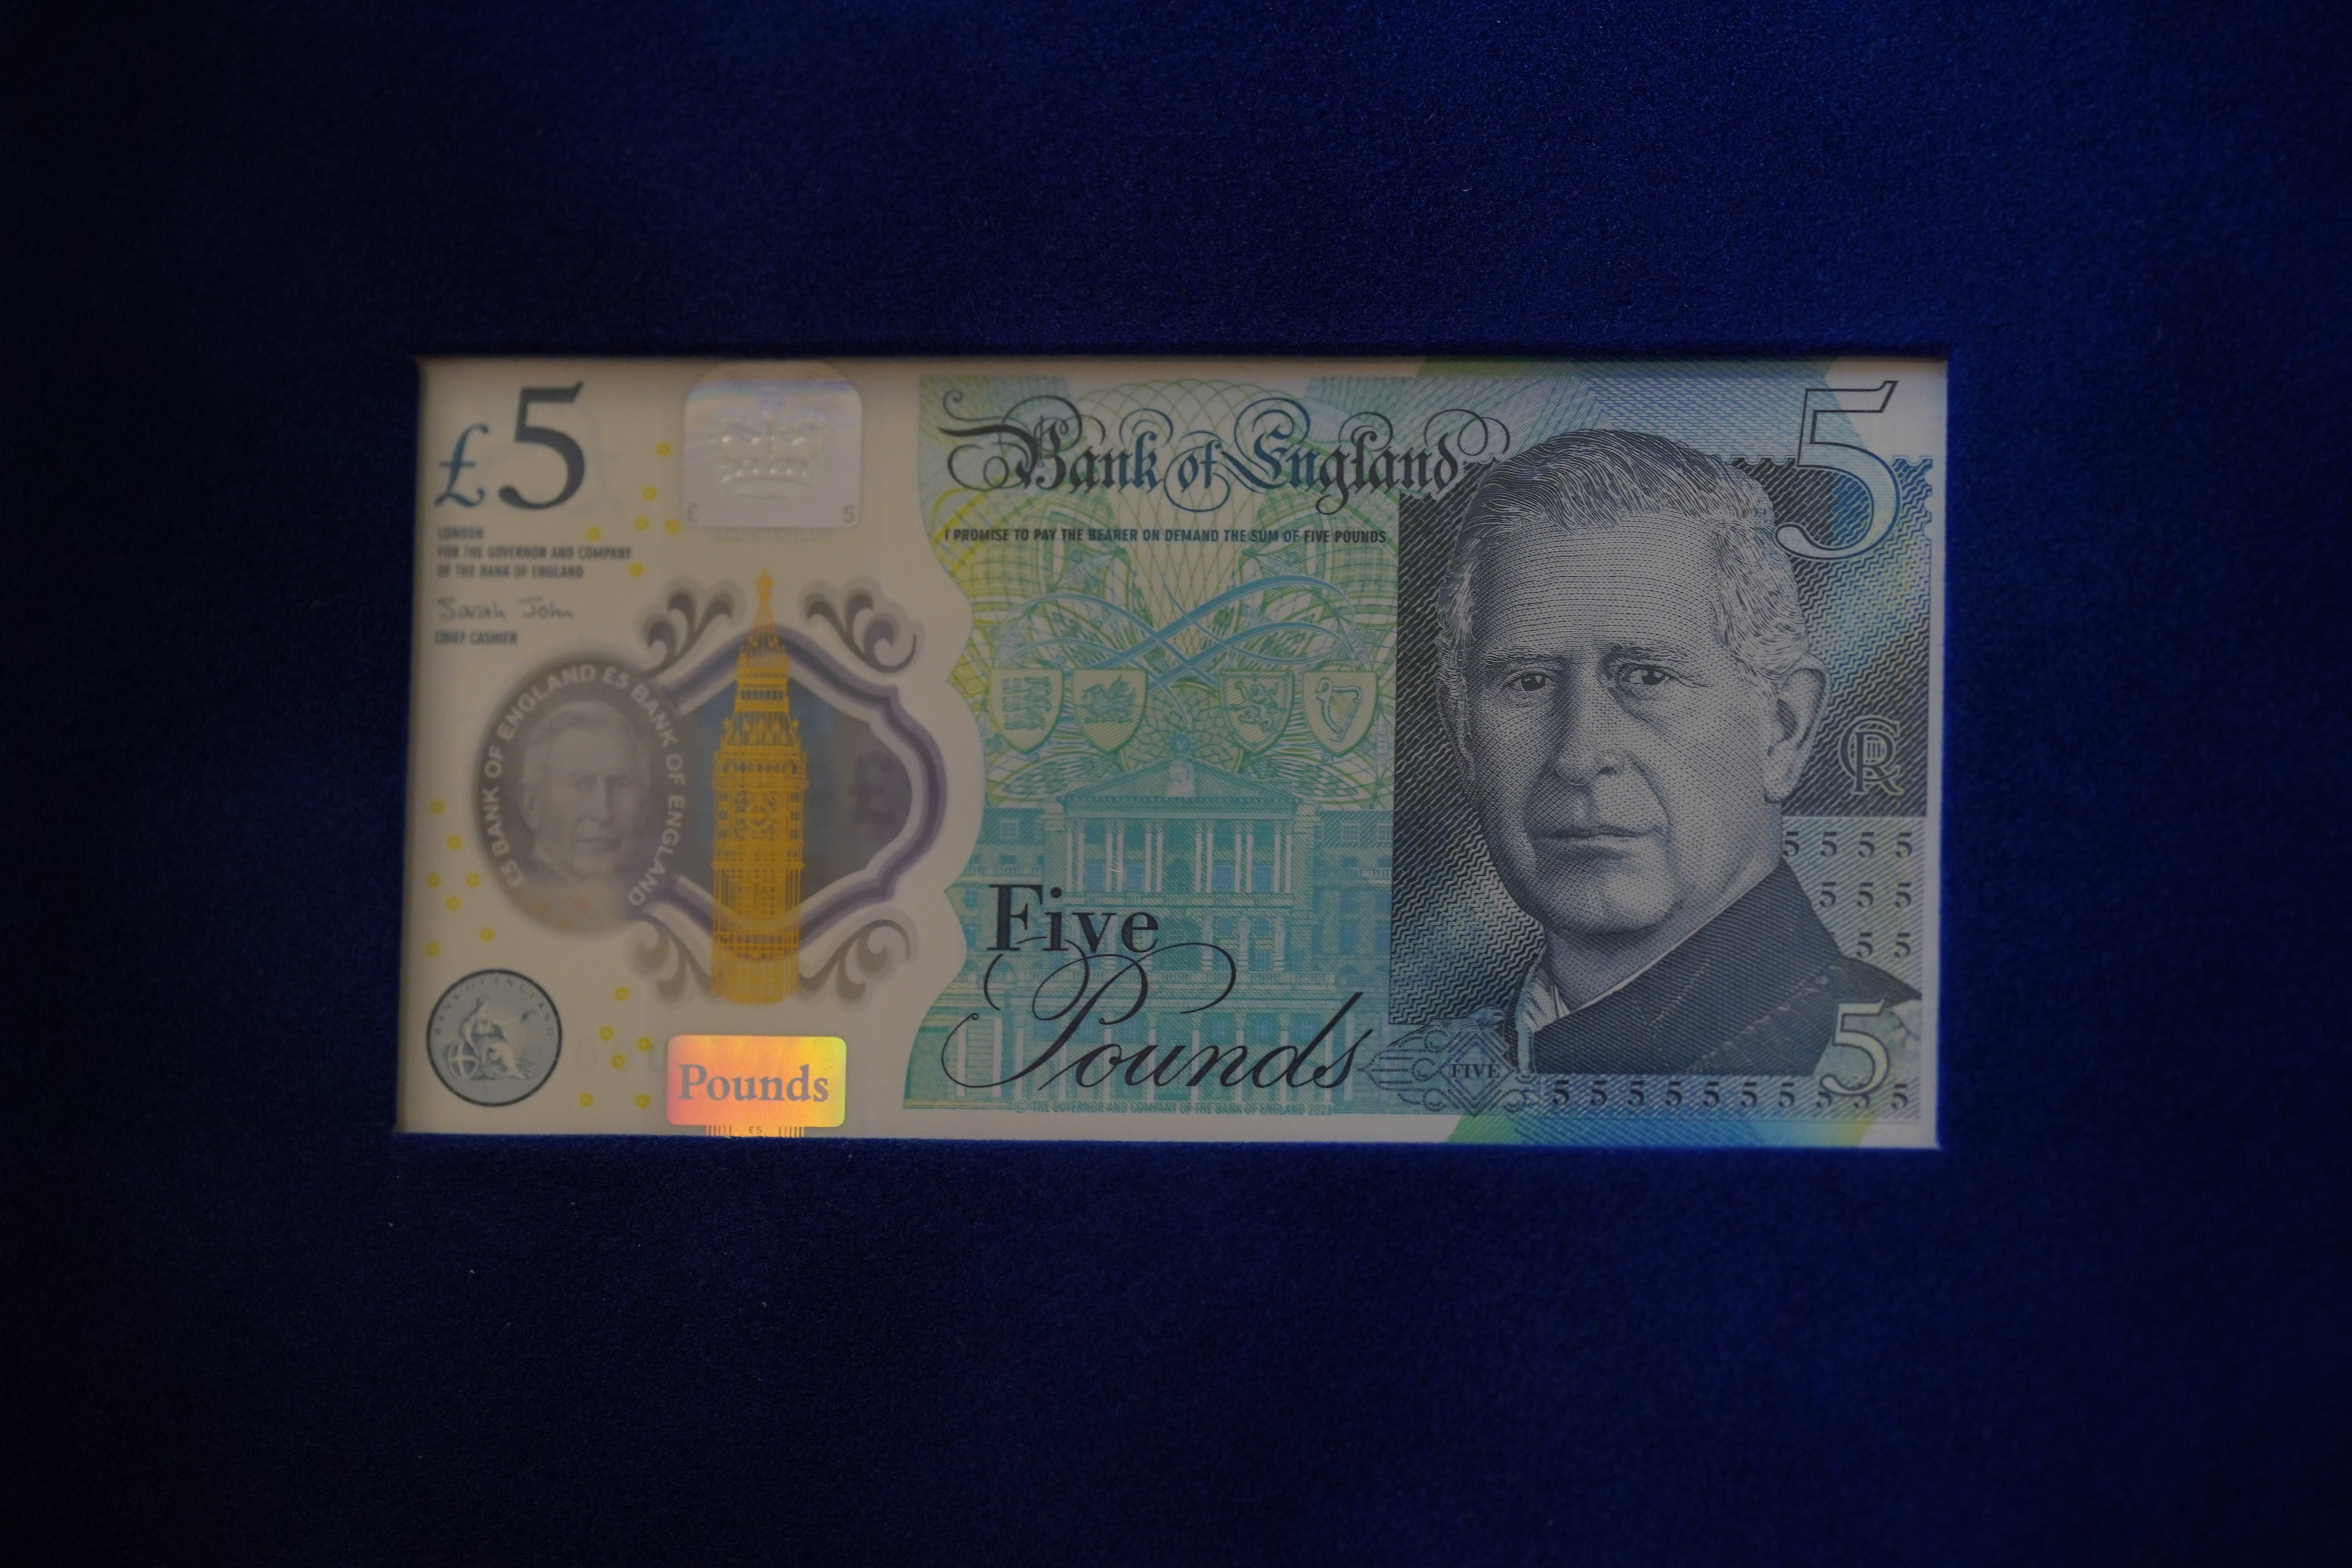 A £5 bank note bearing a portrait of King Charles III